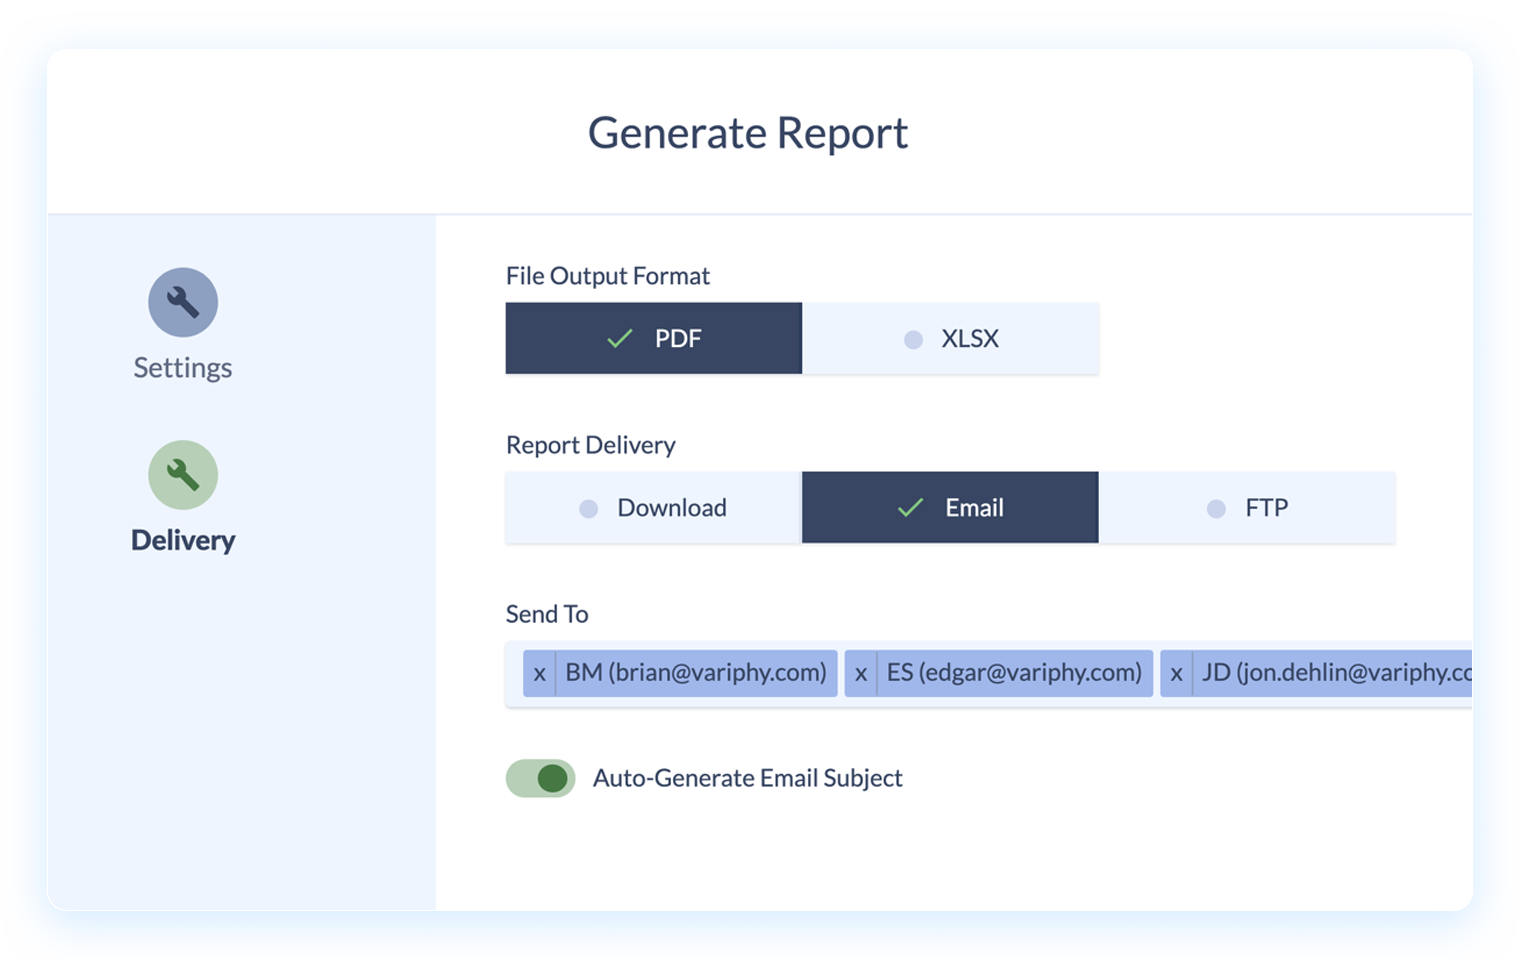 Generate reports for your teams.